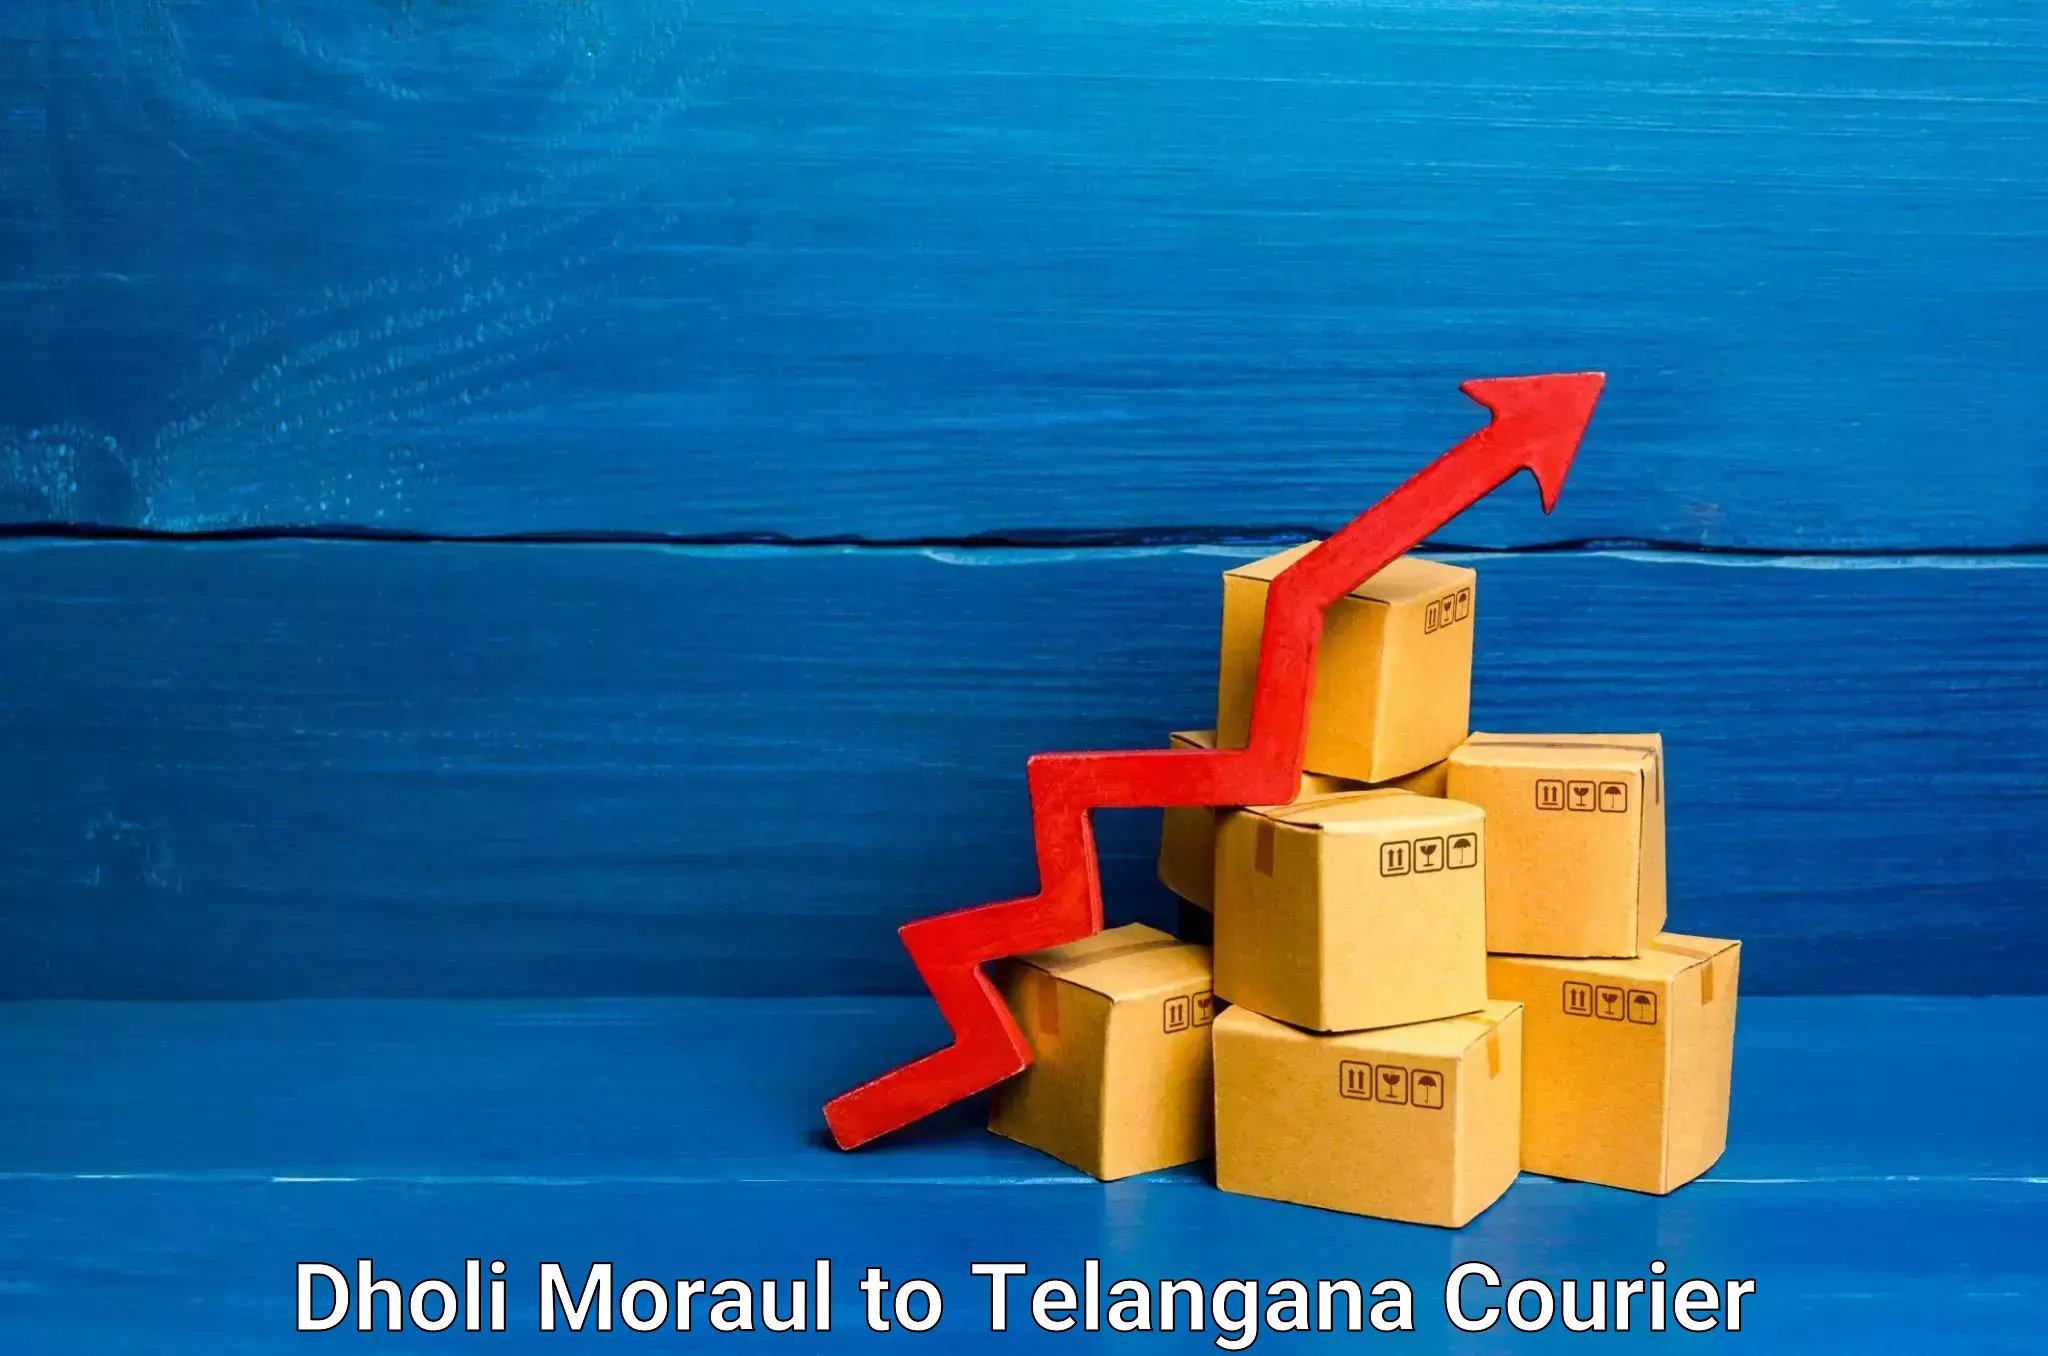 Professional packing services Dholi Moraul to Kacheguda